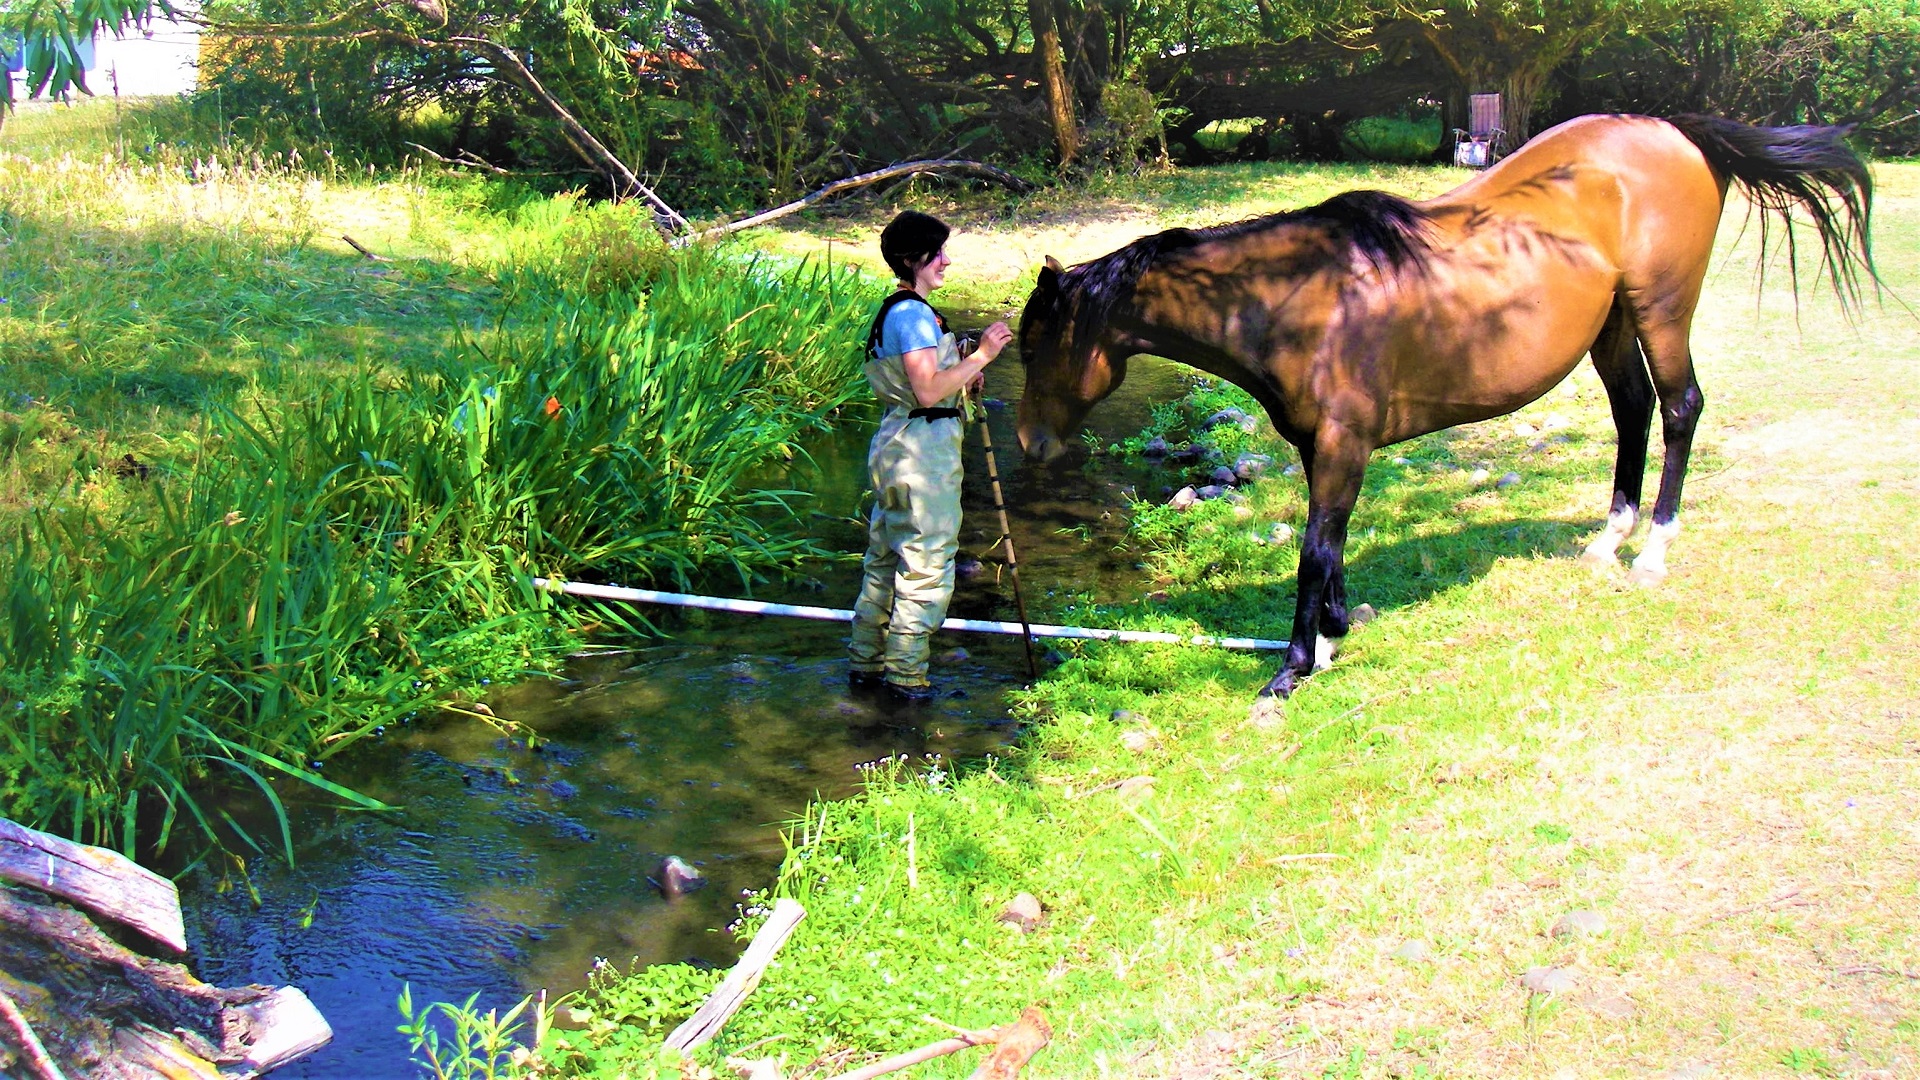 A horse near the edge of a stream looks at person standing in the stream